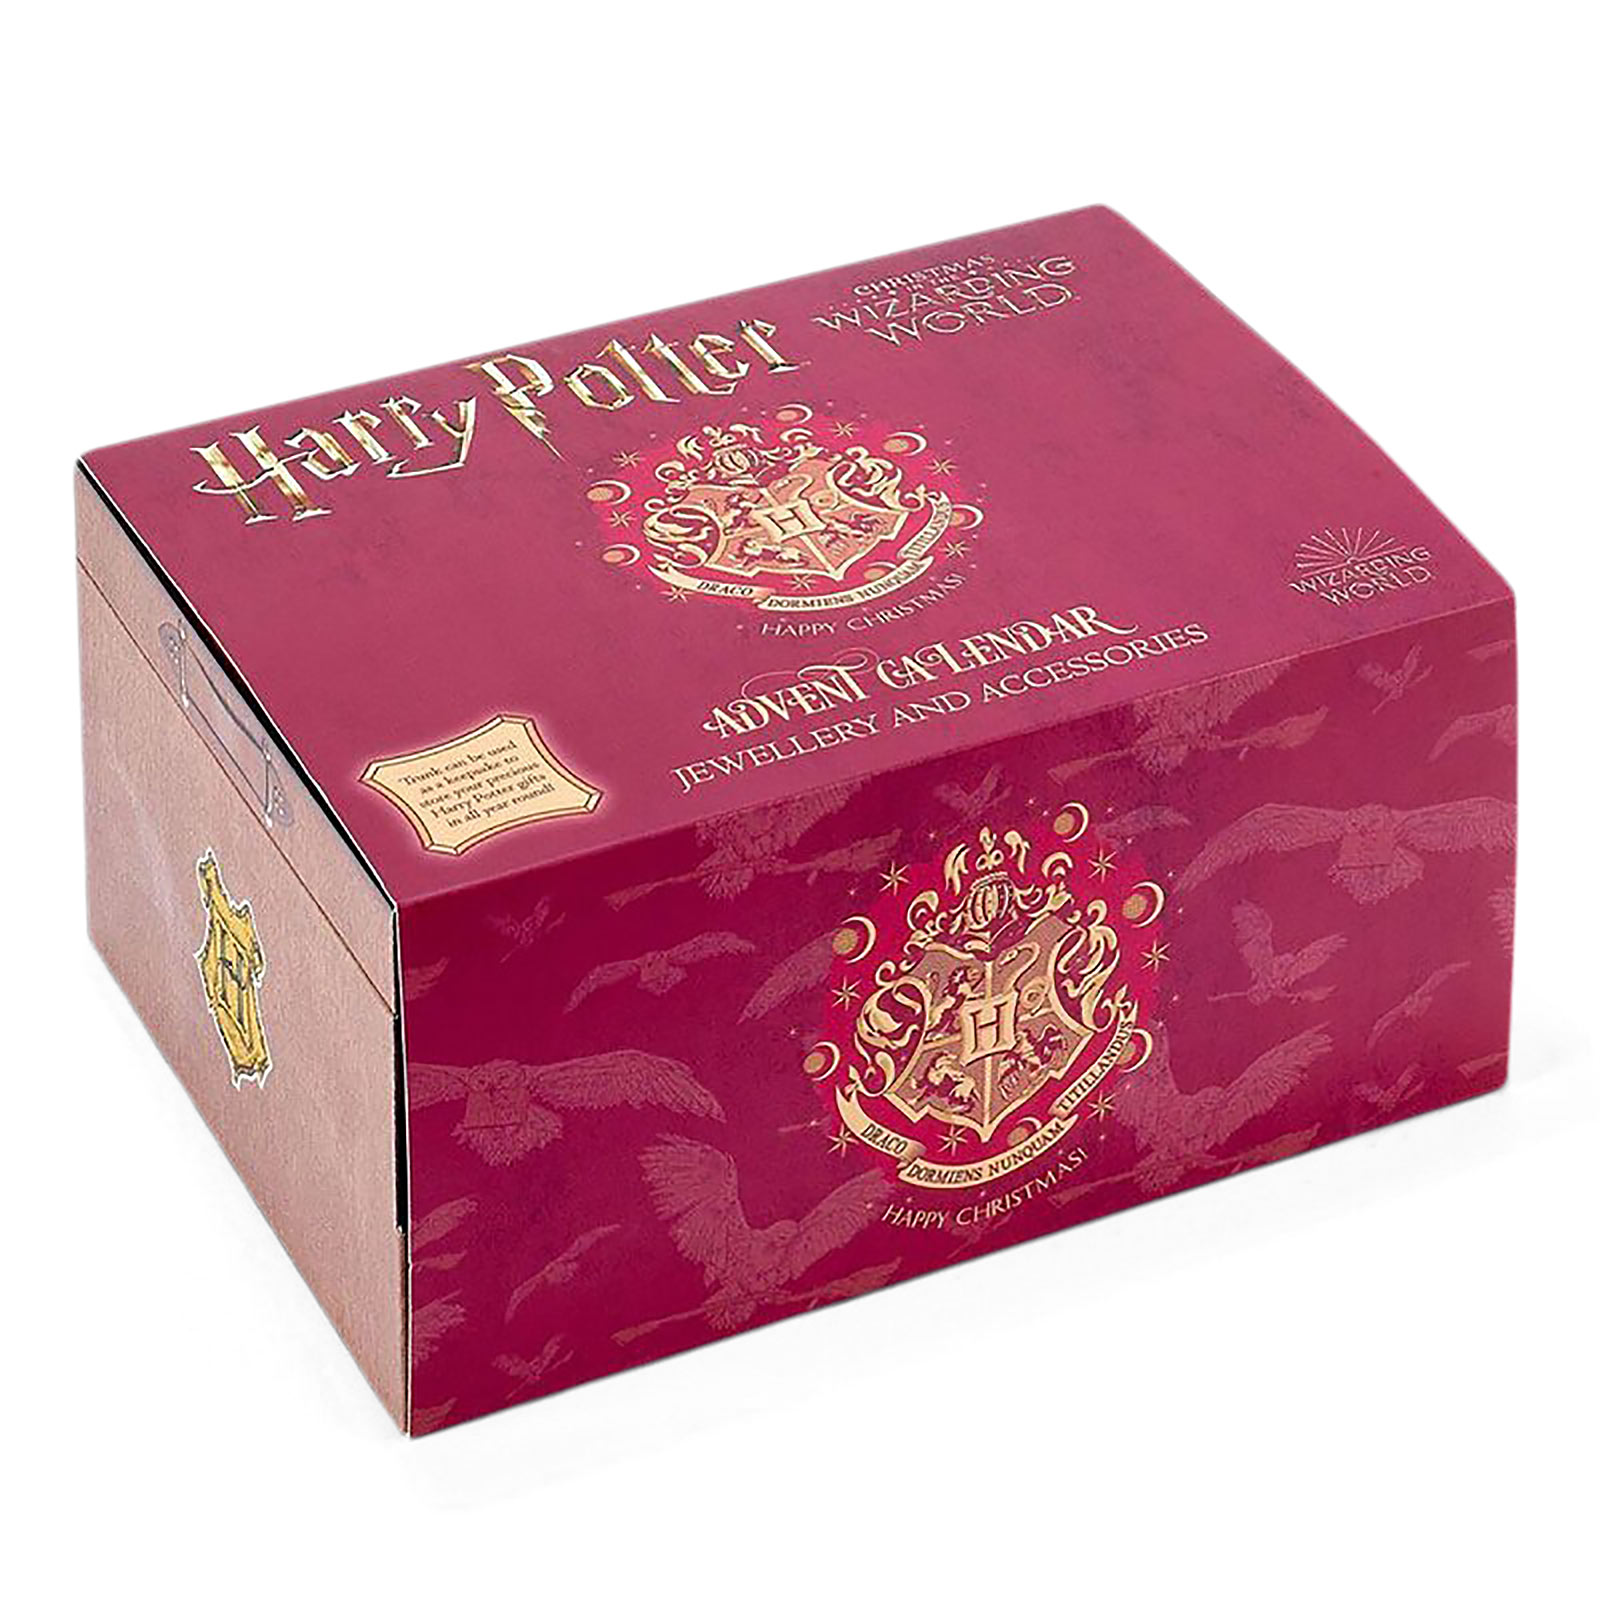 Harry Potter - Jewelry Advent Calendar in Gift Box